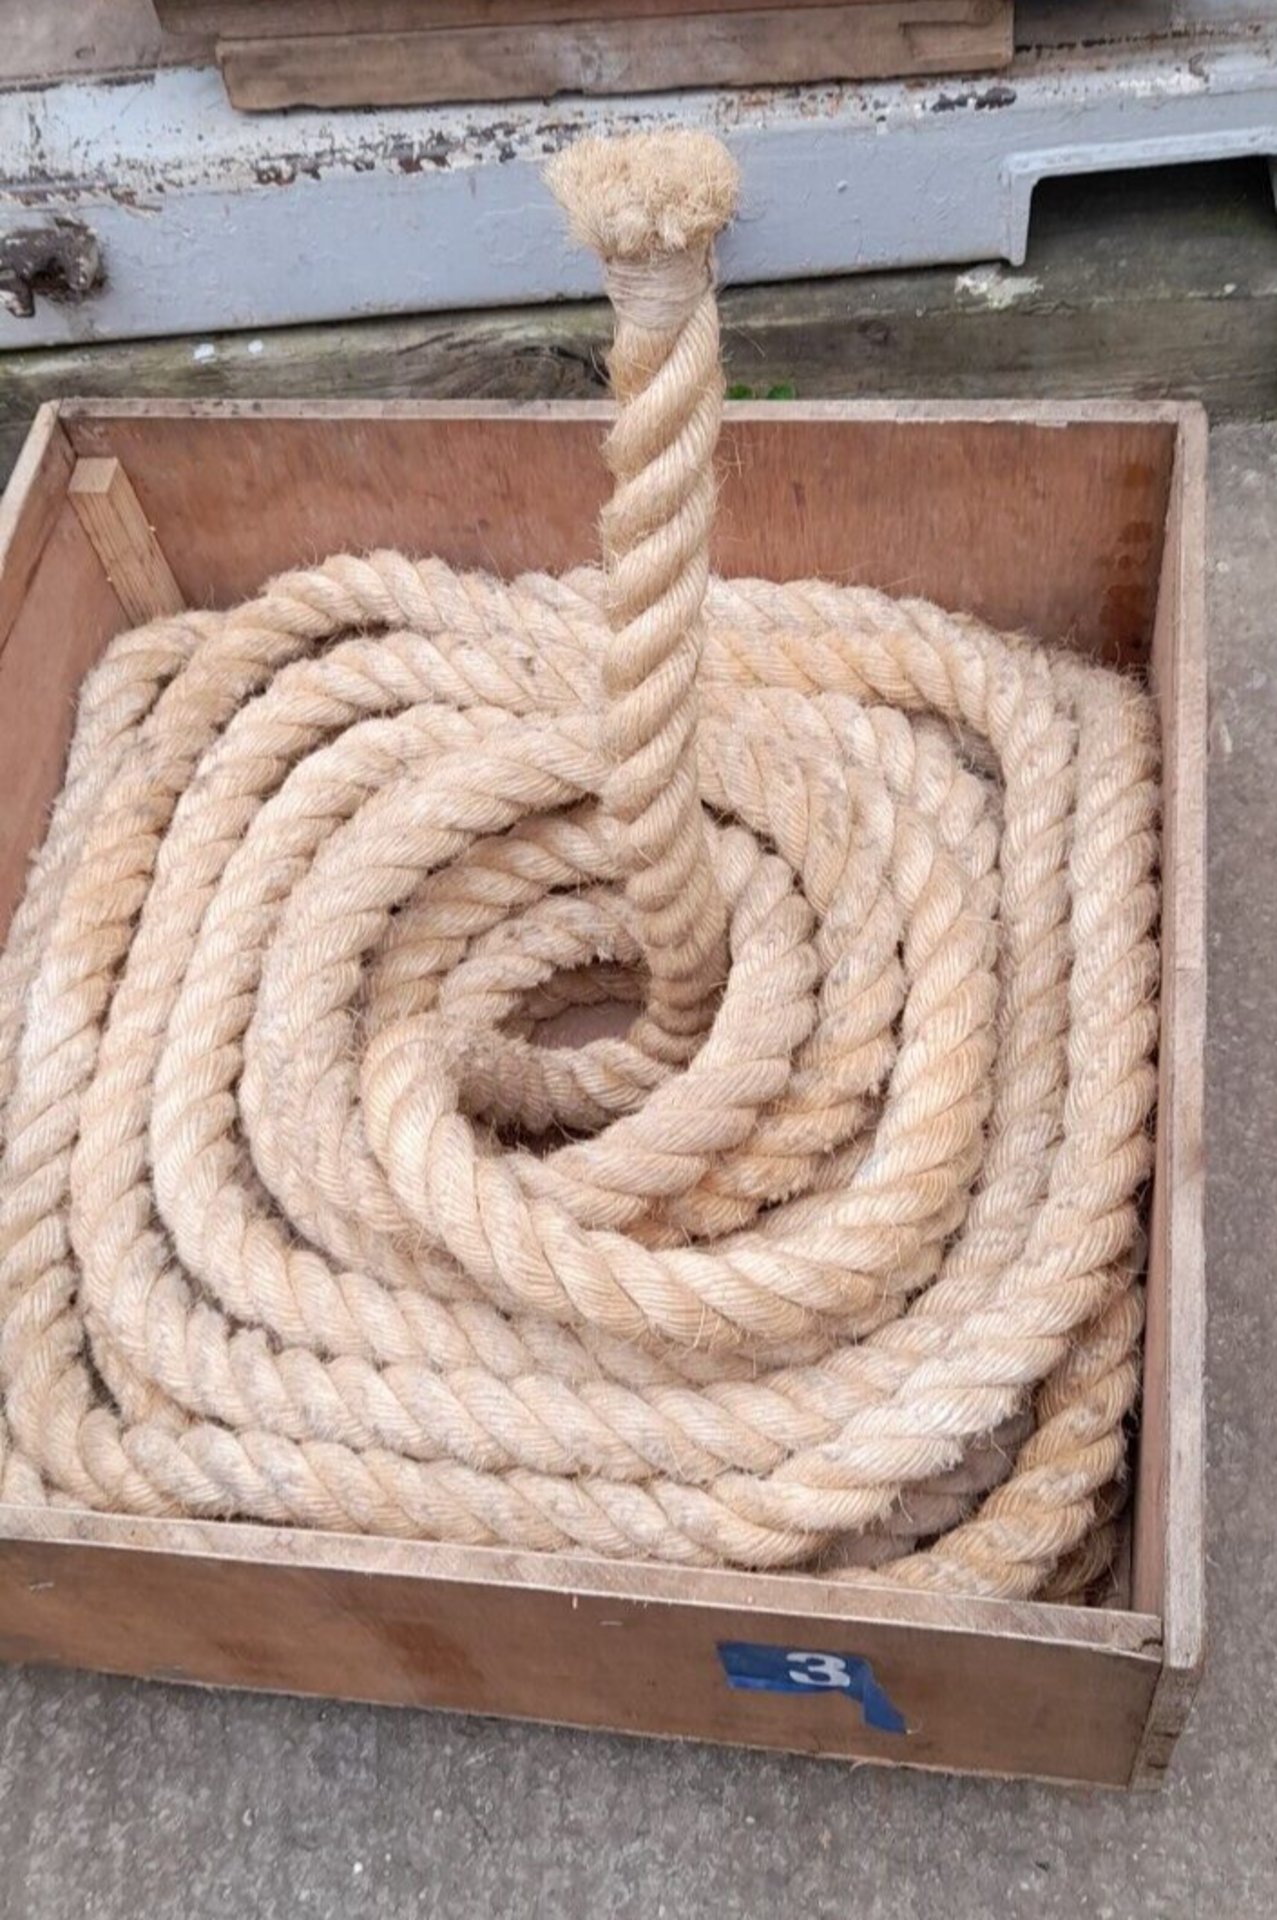 sport TUG O WAR ROPE, USED ONCE, DRY STORED, ABOUT 29 METERS L X 13cm circumference sport gym